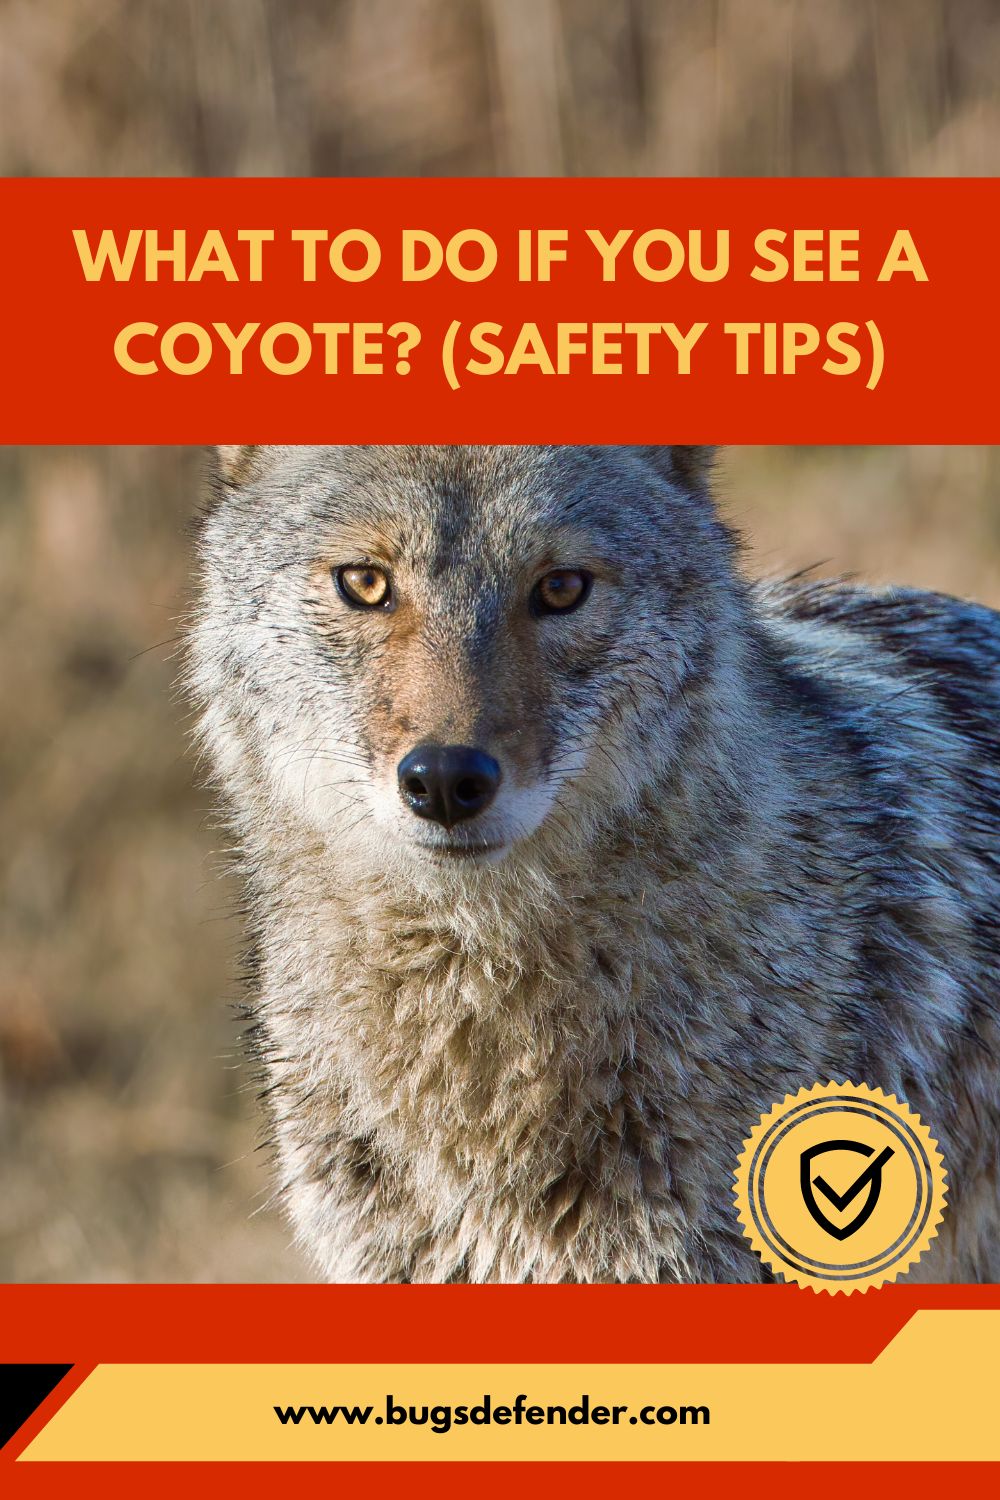 What To Do If You See a Coyote pin1